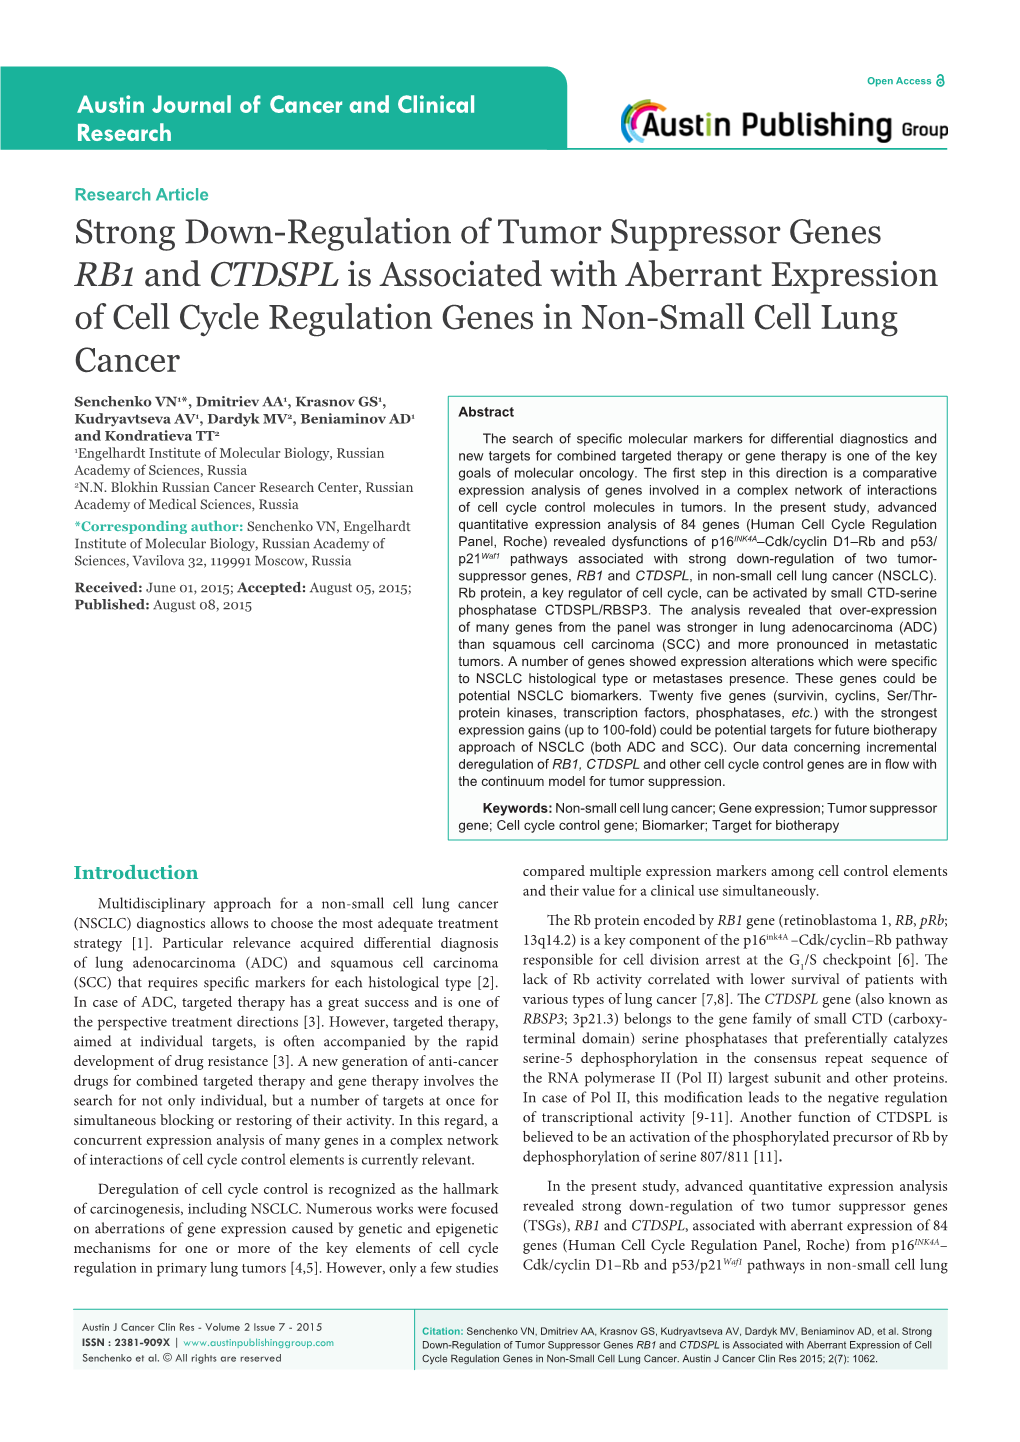 Strong Down-Regulation of Tumor Suppressor Genes RB1 and CTDSPL Is Associated with Aberrant Expression of Cell Cycle Regulation Genes in Non-Small Cell Lung Cancer